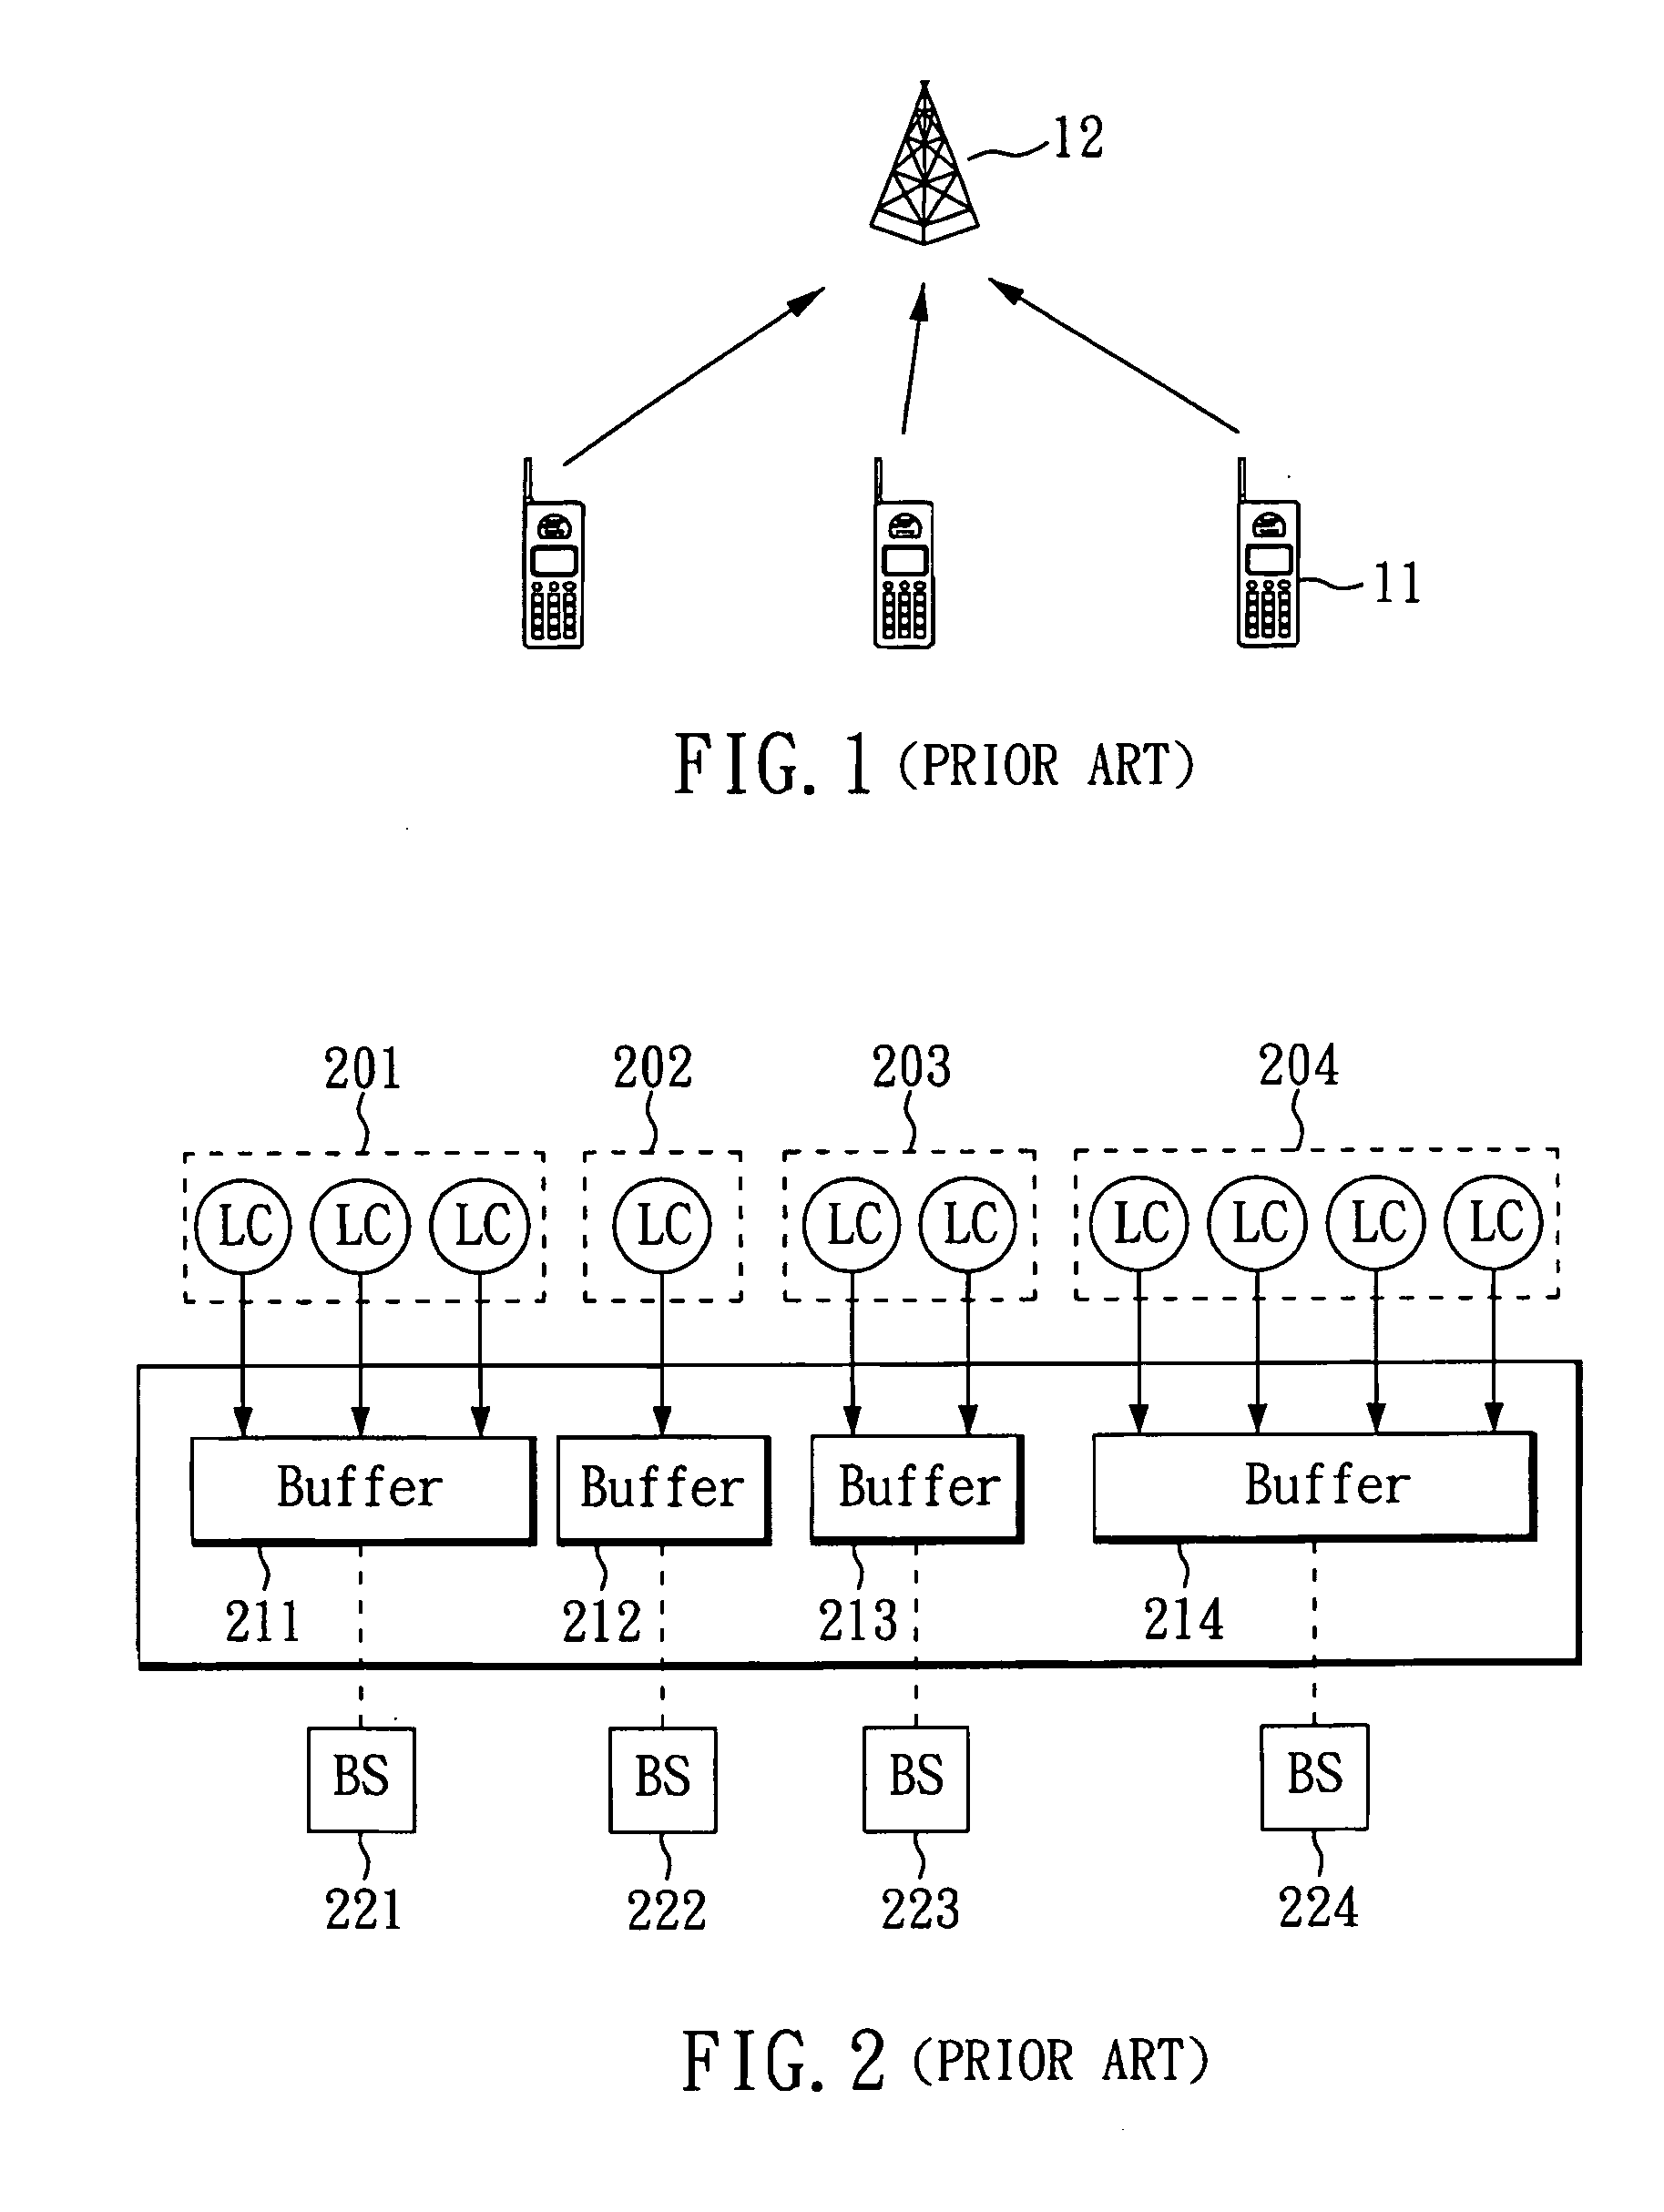 Method for providing a buffer status report in a mobile communication network